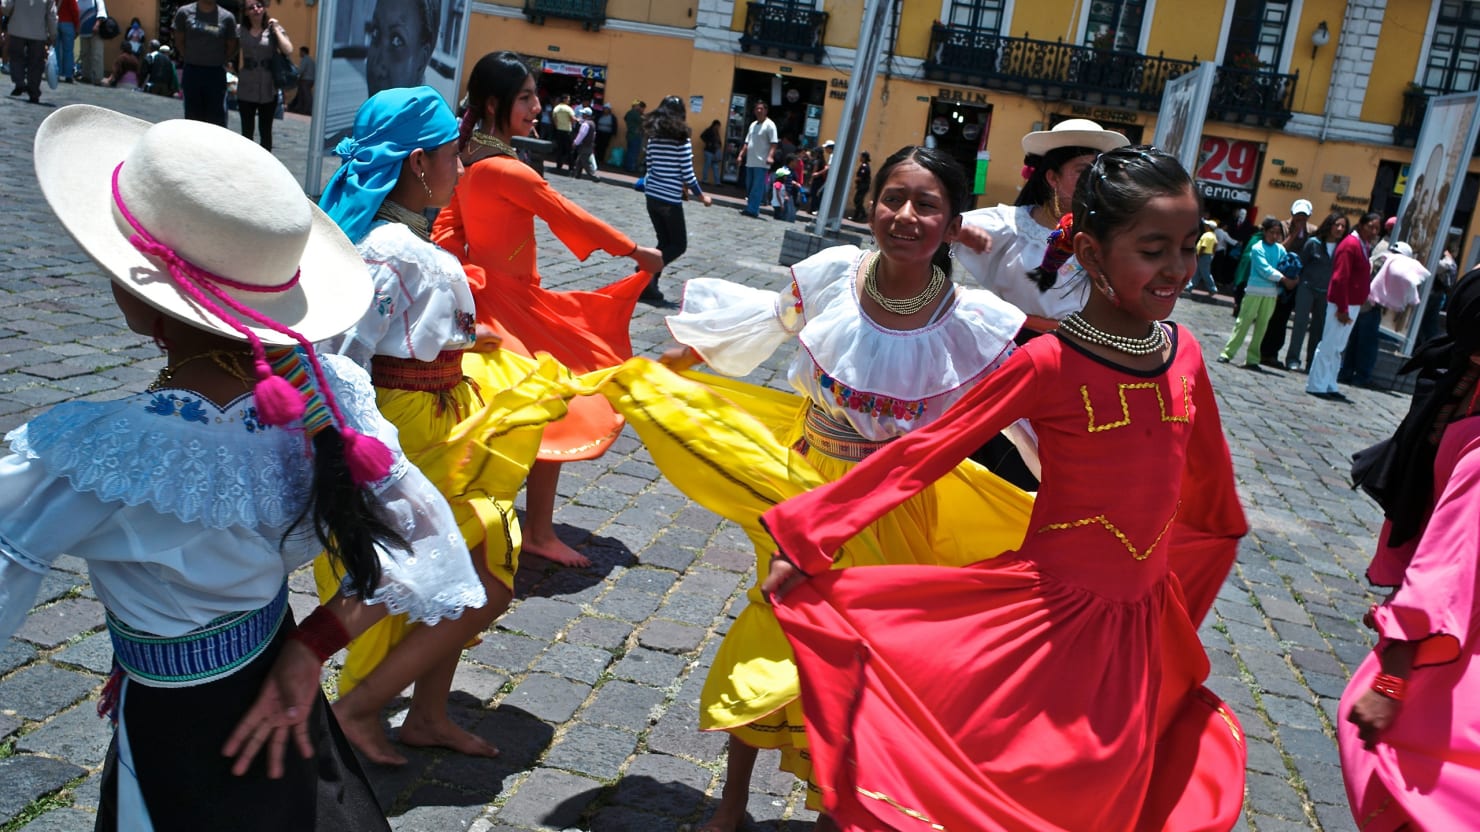 Next Stop, Quito: Our Top Cities for 2015